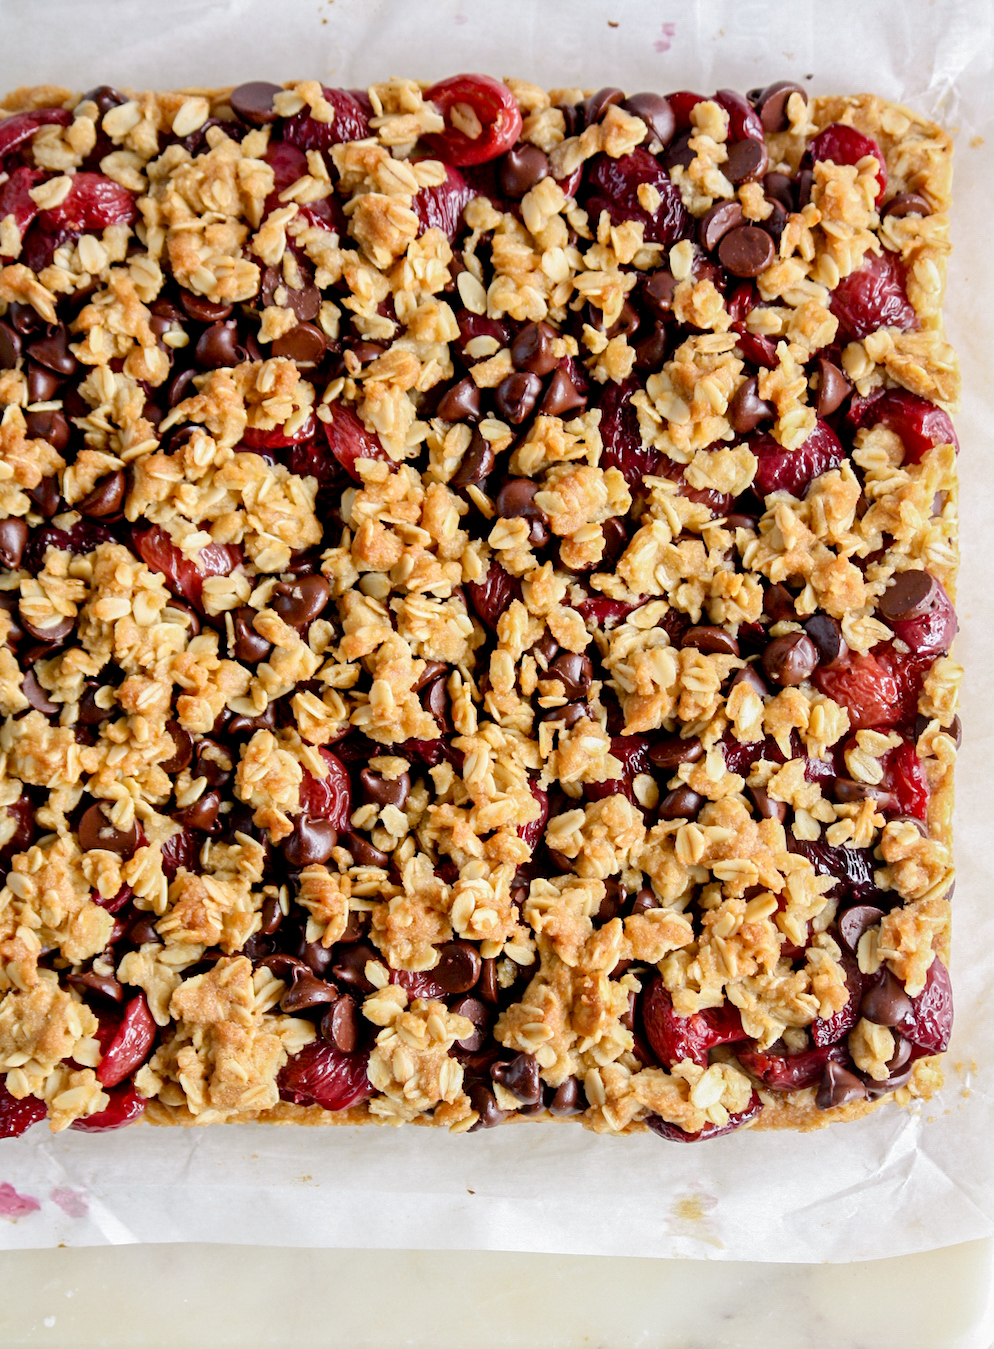 Chewy, crunchy oat crumble bars with roasted cherries and chocolate chips